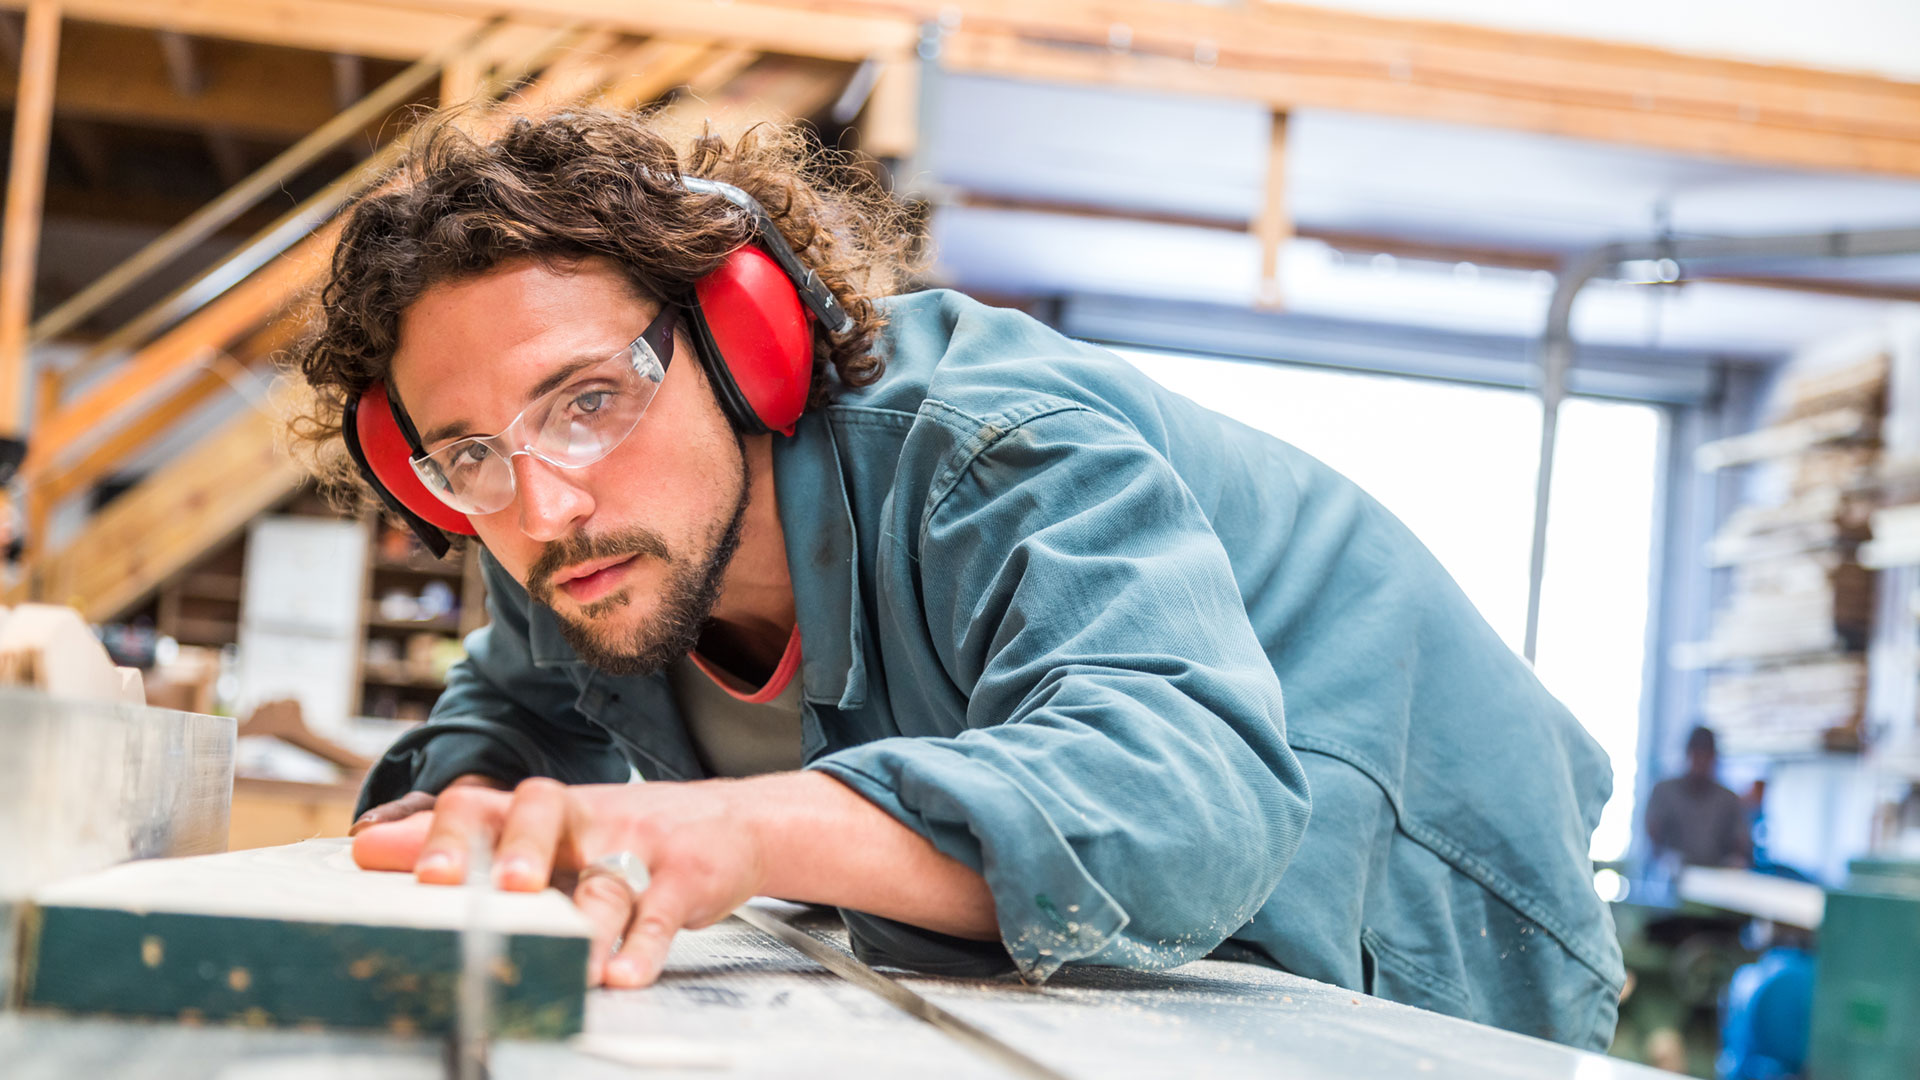 man-leaning-over-his-work-bench-cutting-piece-of-work-with-a-saw